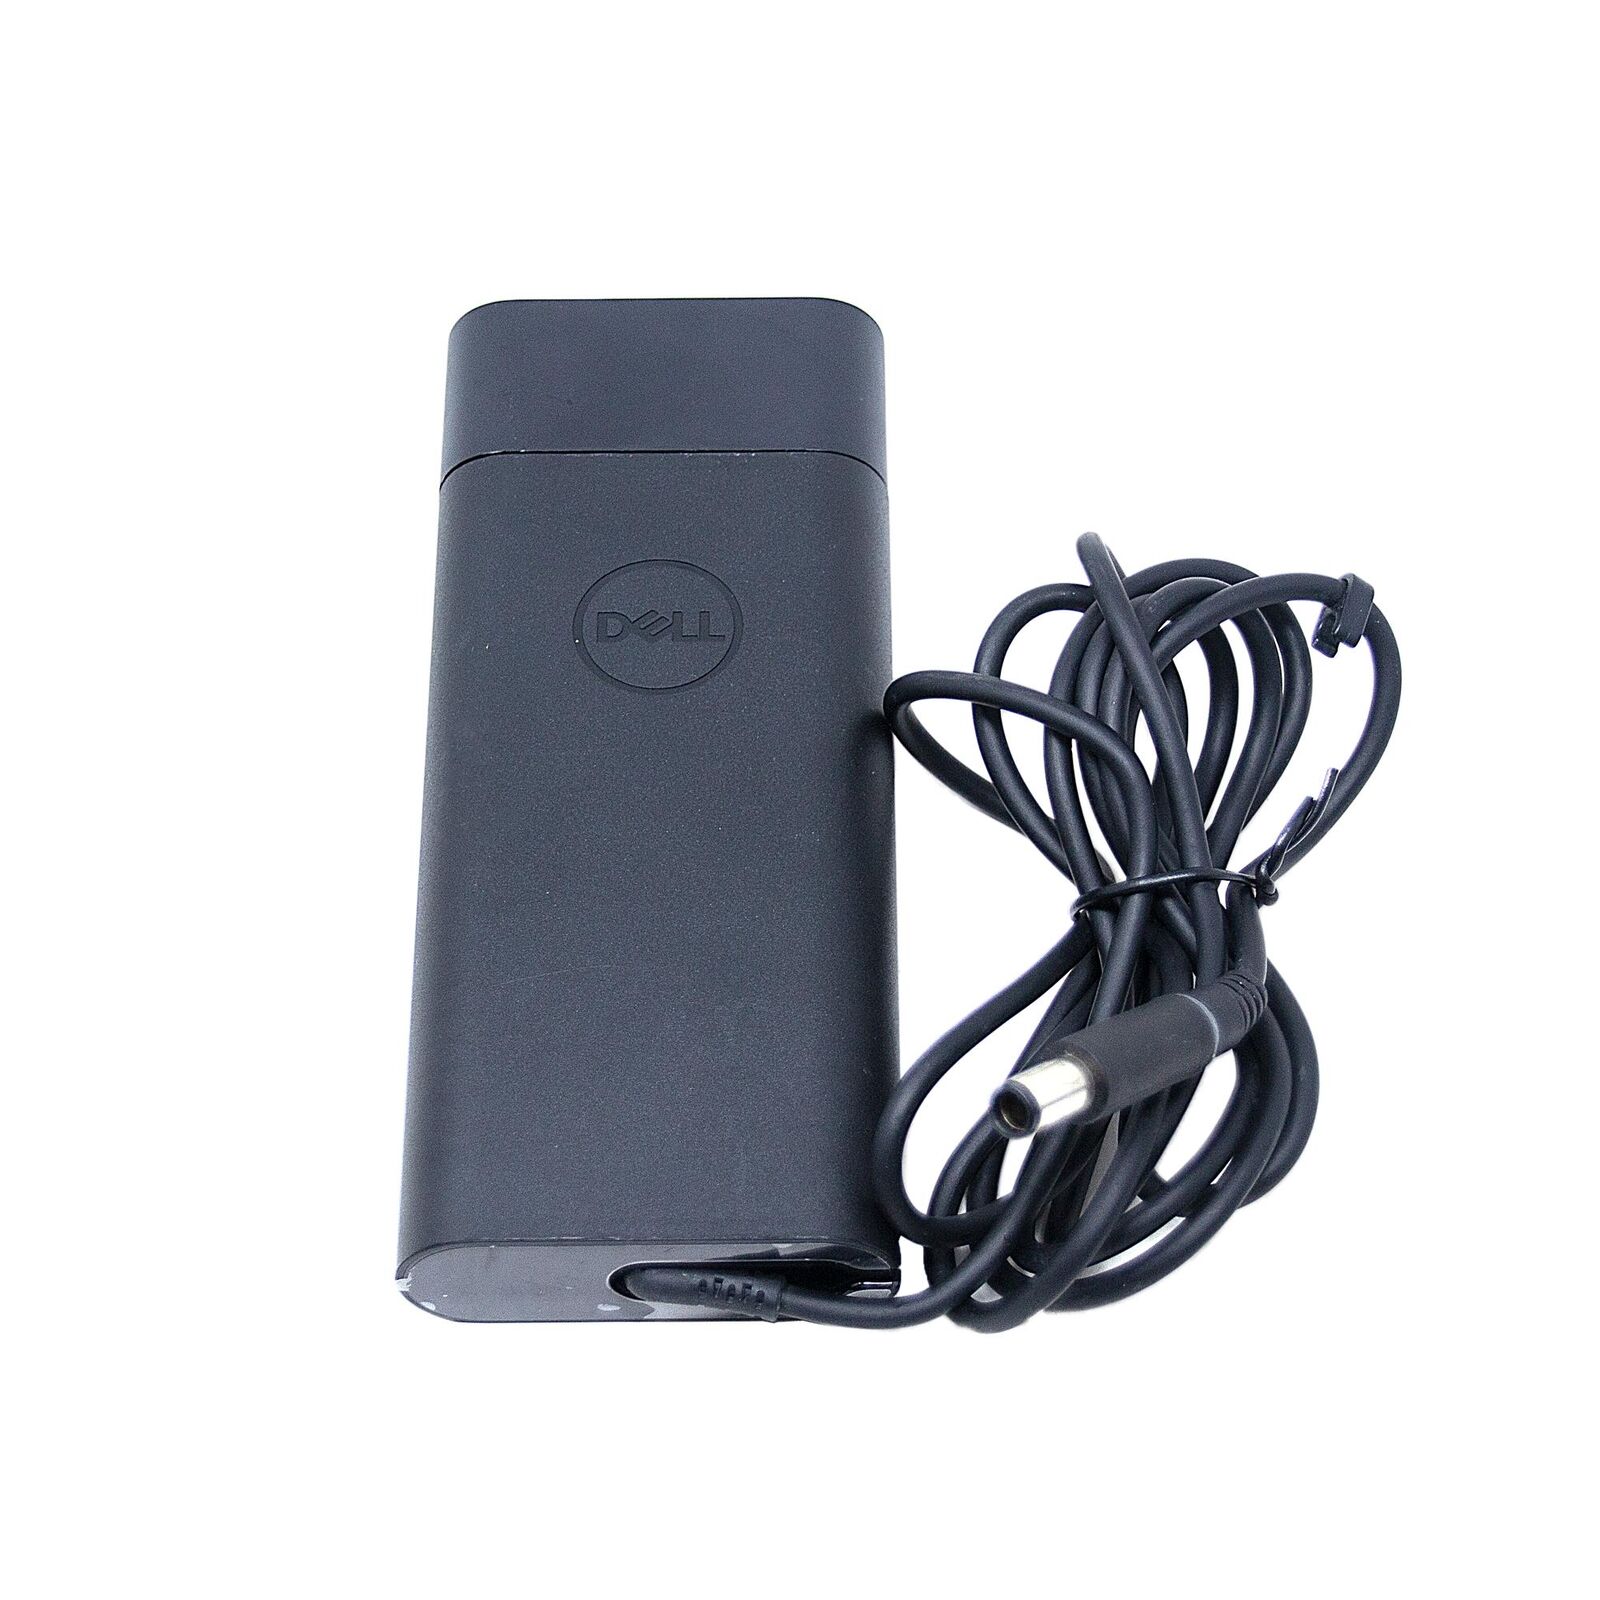 DELL HFVHX 19.5V 4.62A 90W Genuine Original AC Power Adapter Charger